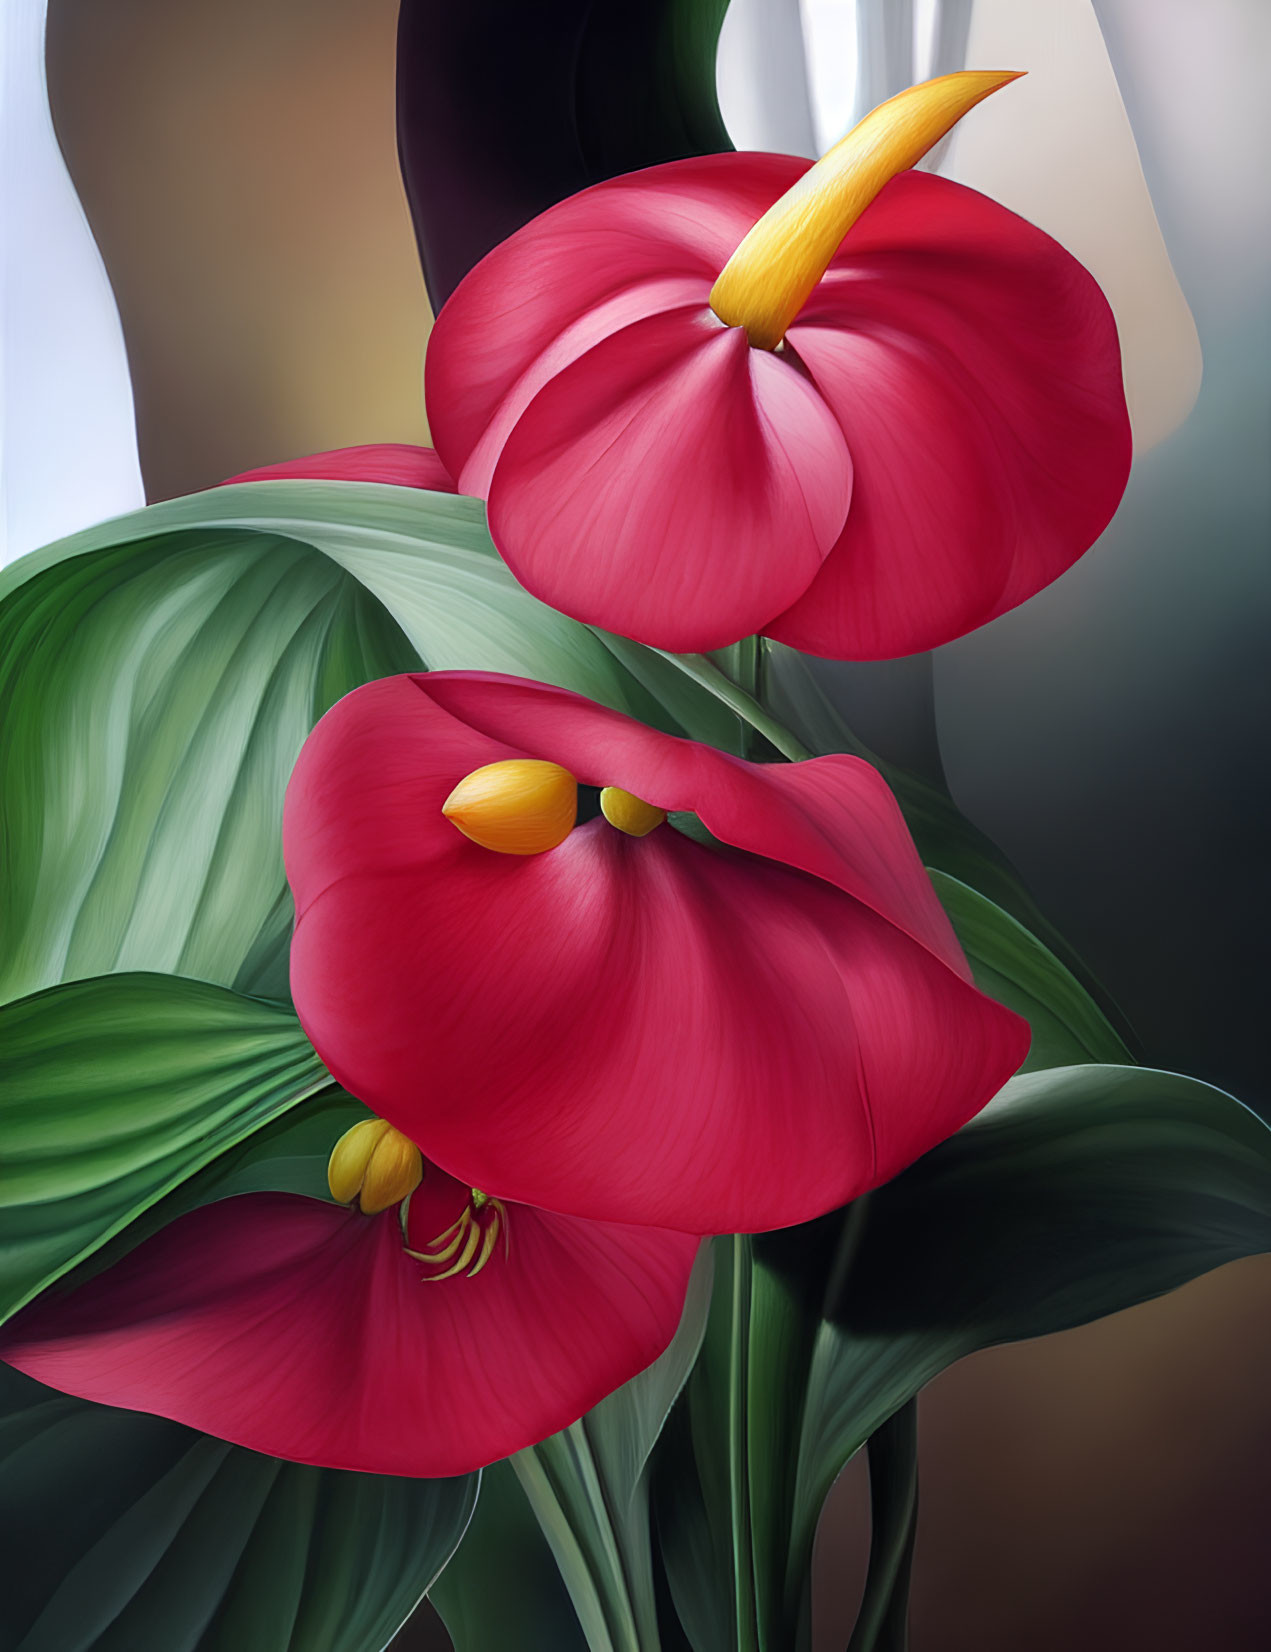 Vibrant red anthurium flowers with green leaves and yellow spadices on soft-focus background